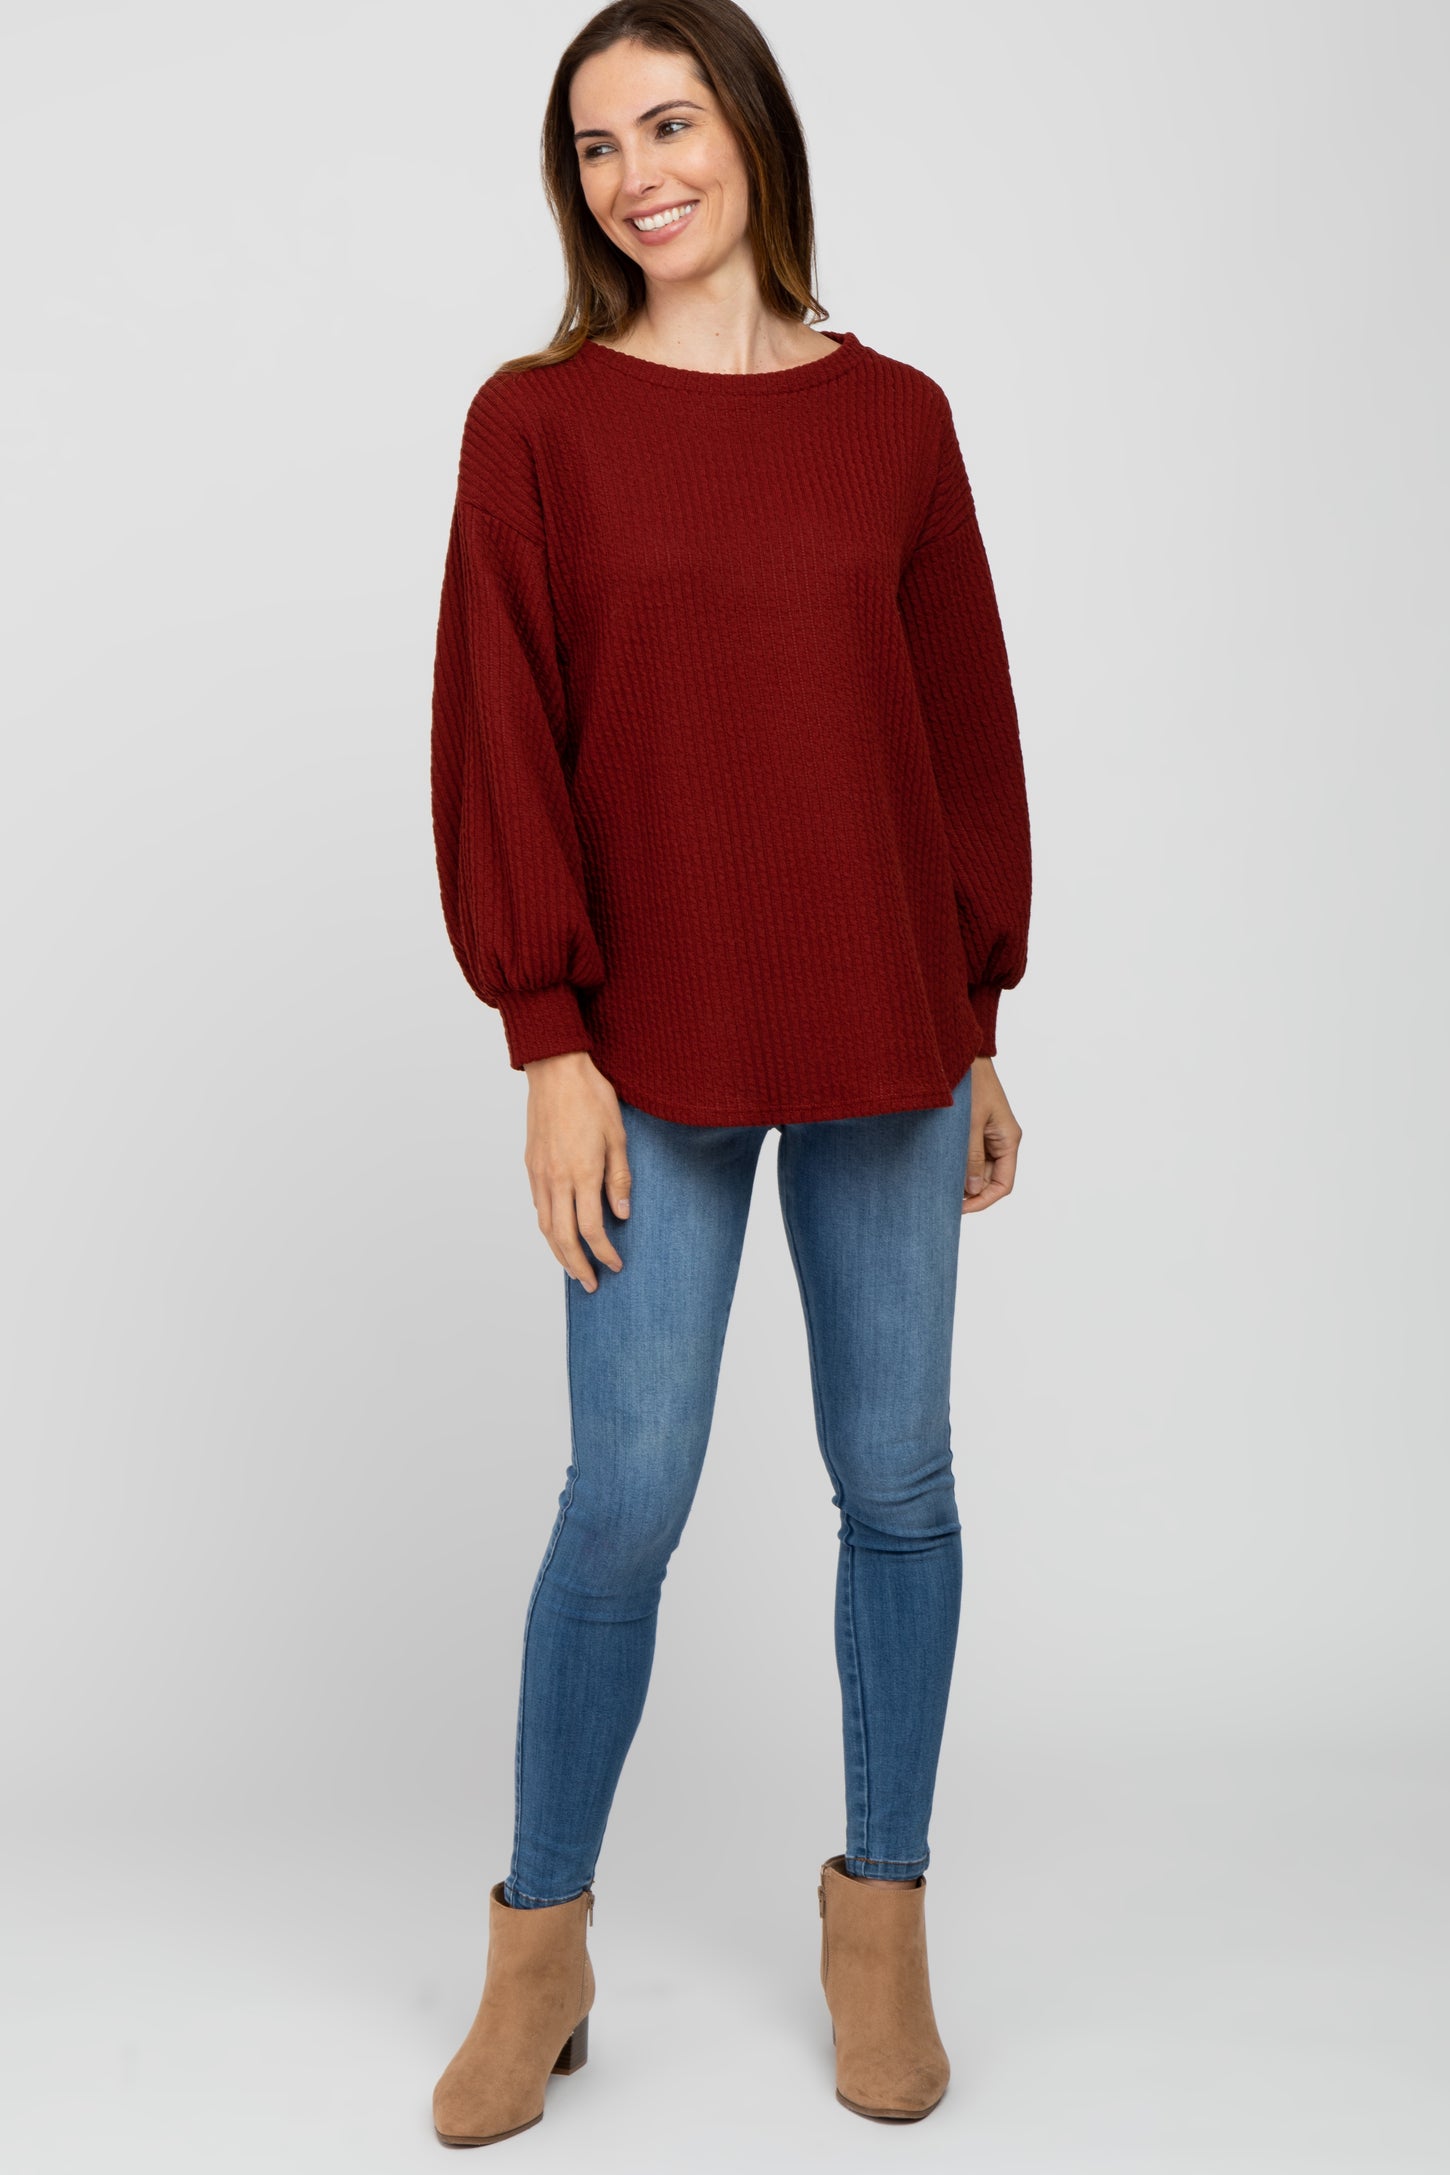 Burgundy Textured Knit Bubble Sleeve Maternity Top